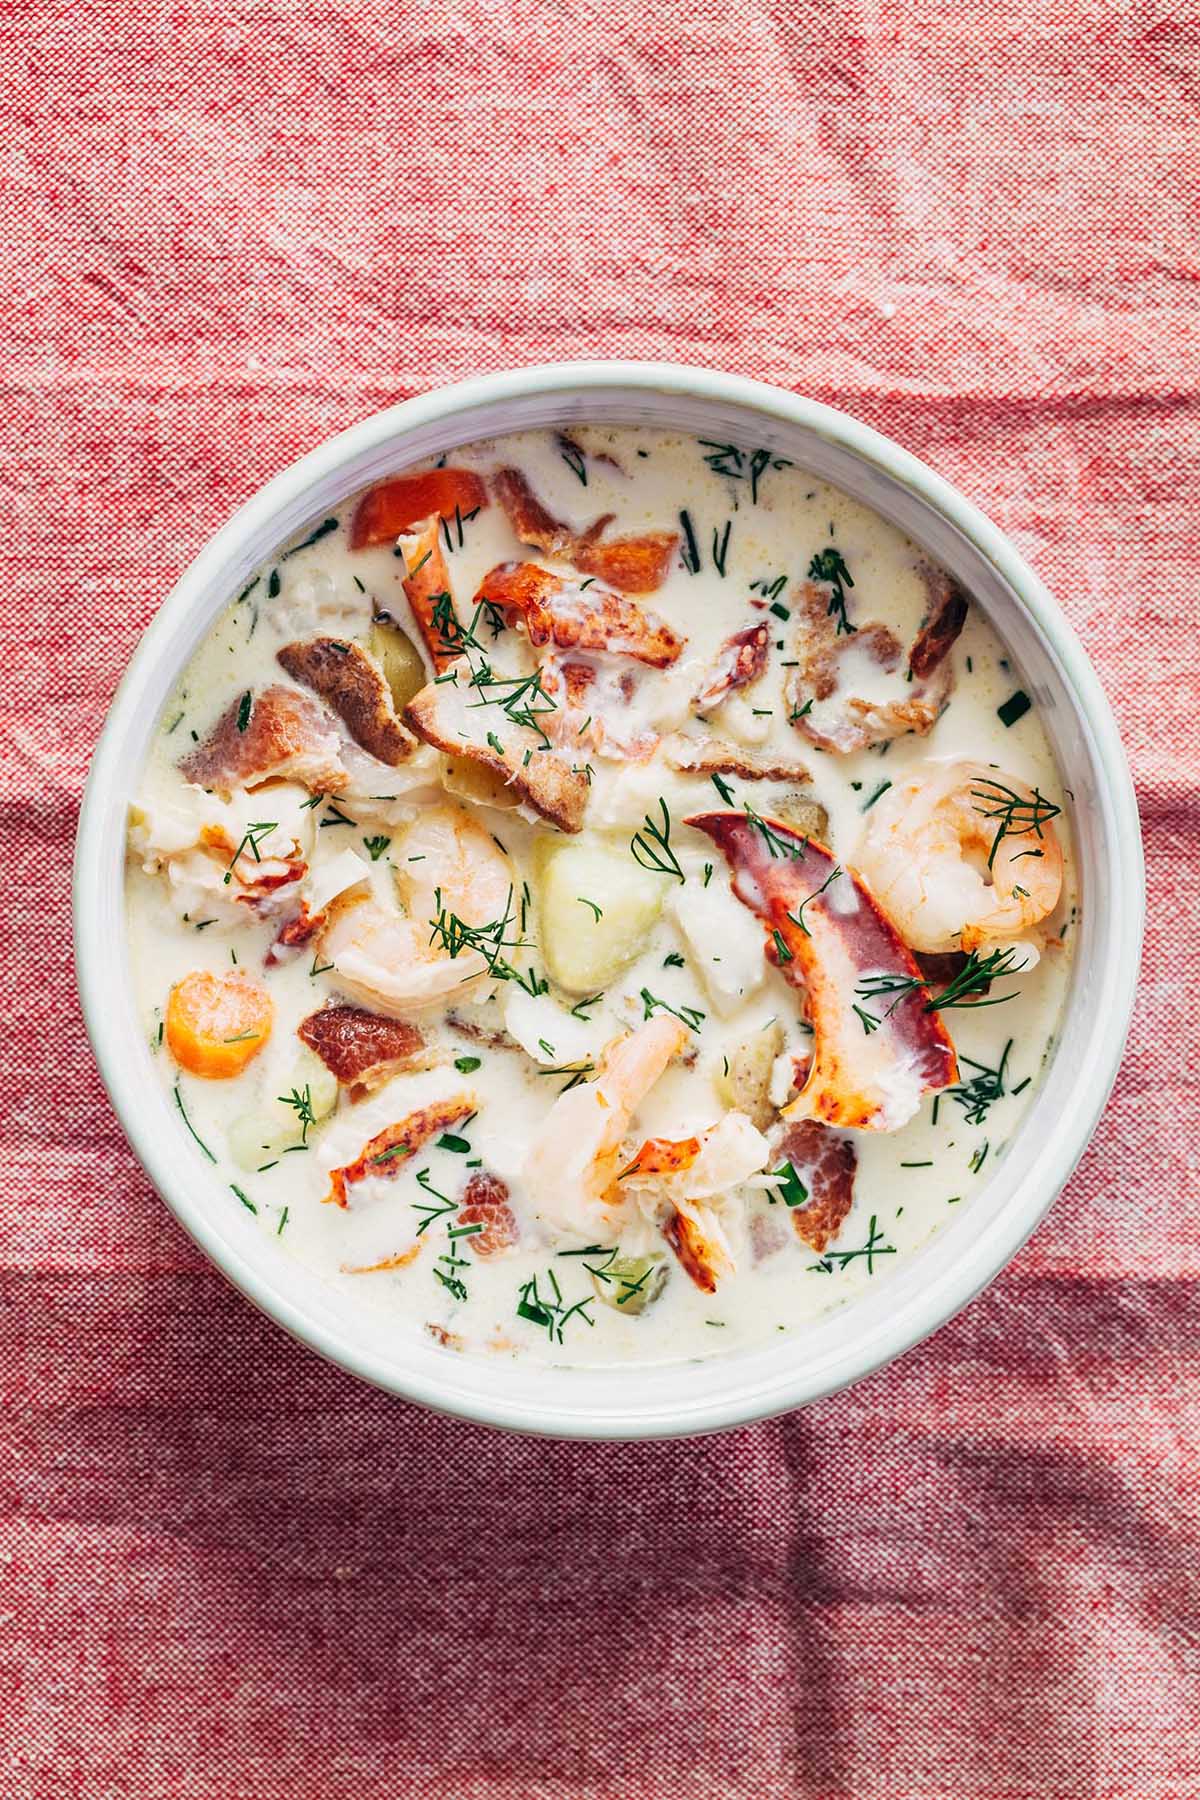 A bowl of creamy seafood soup on a red tablecloth.